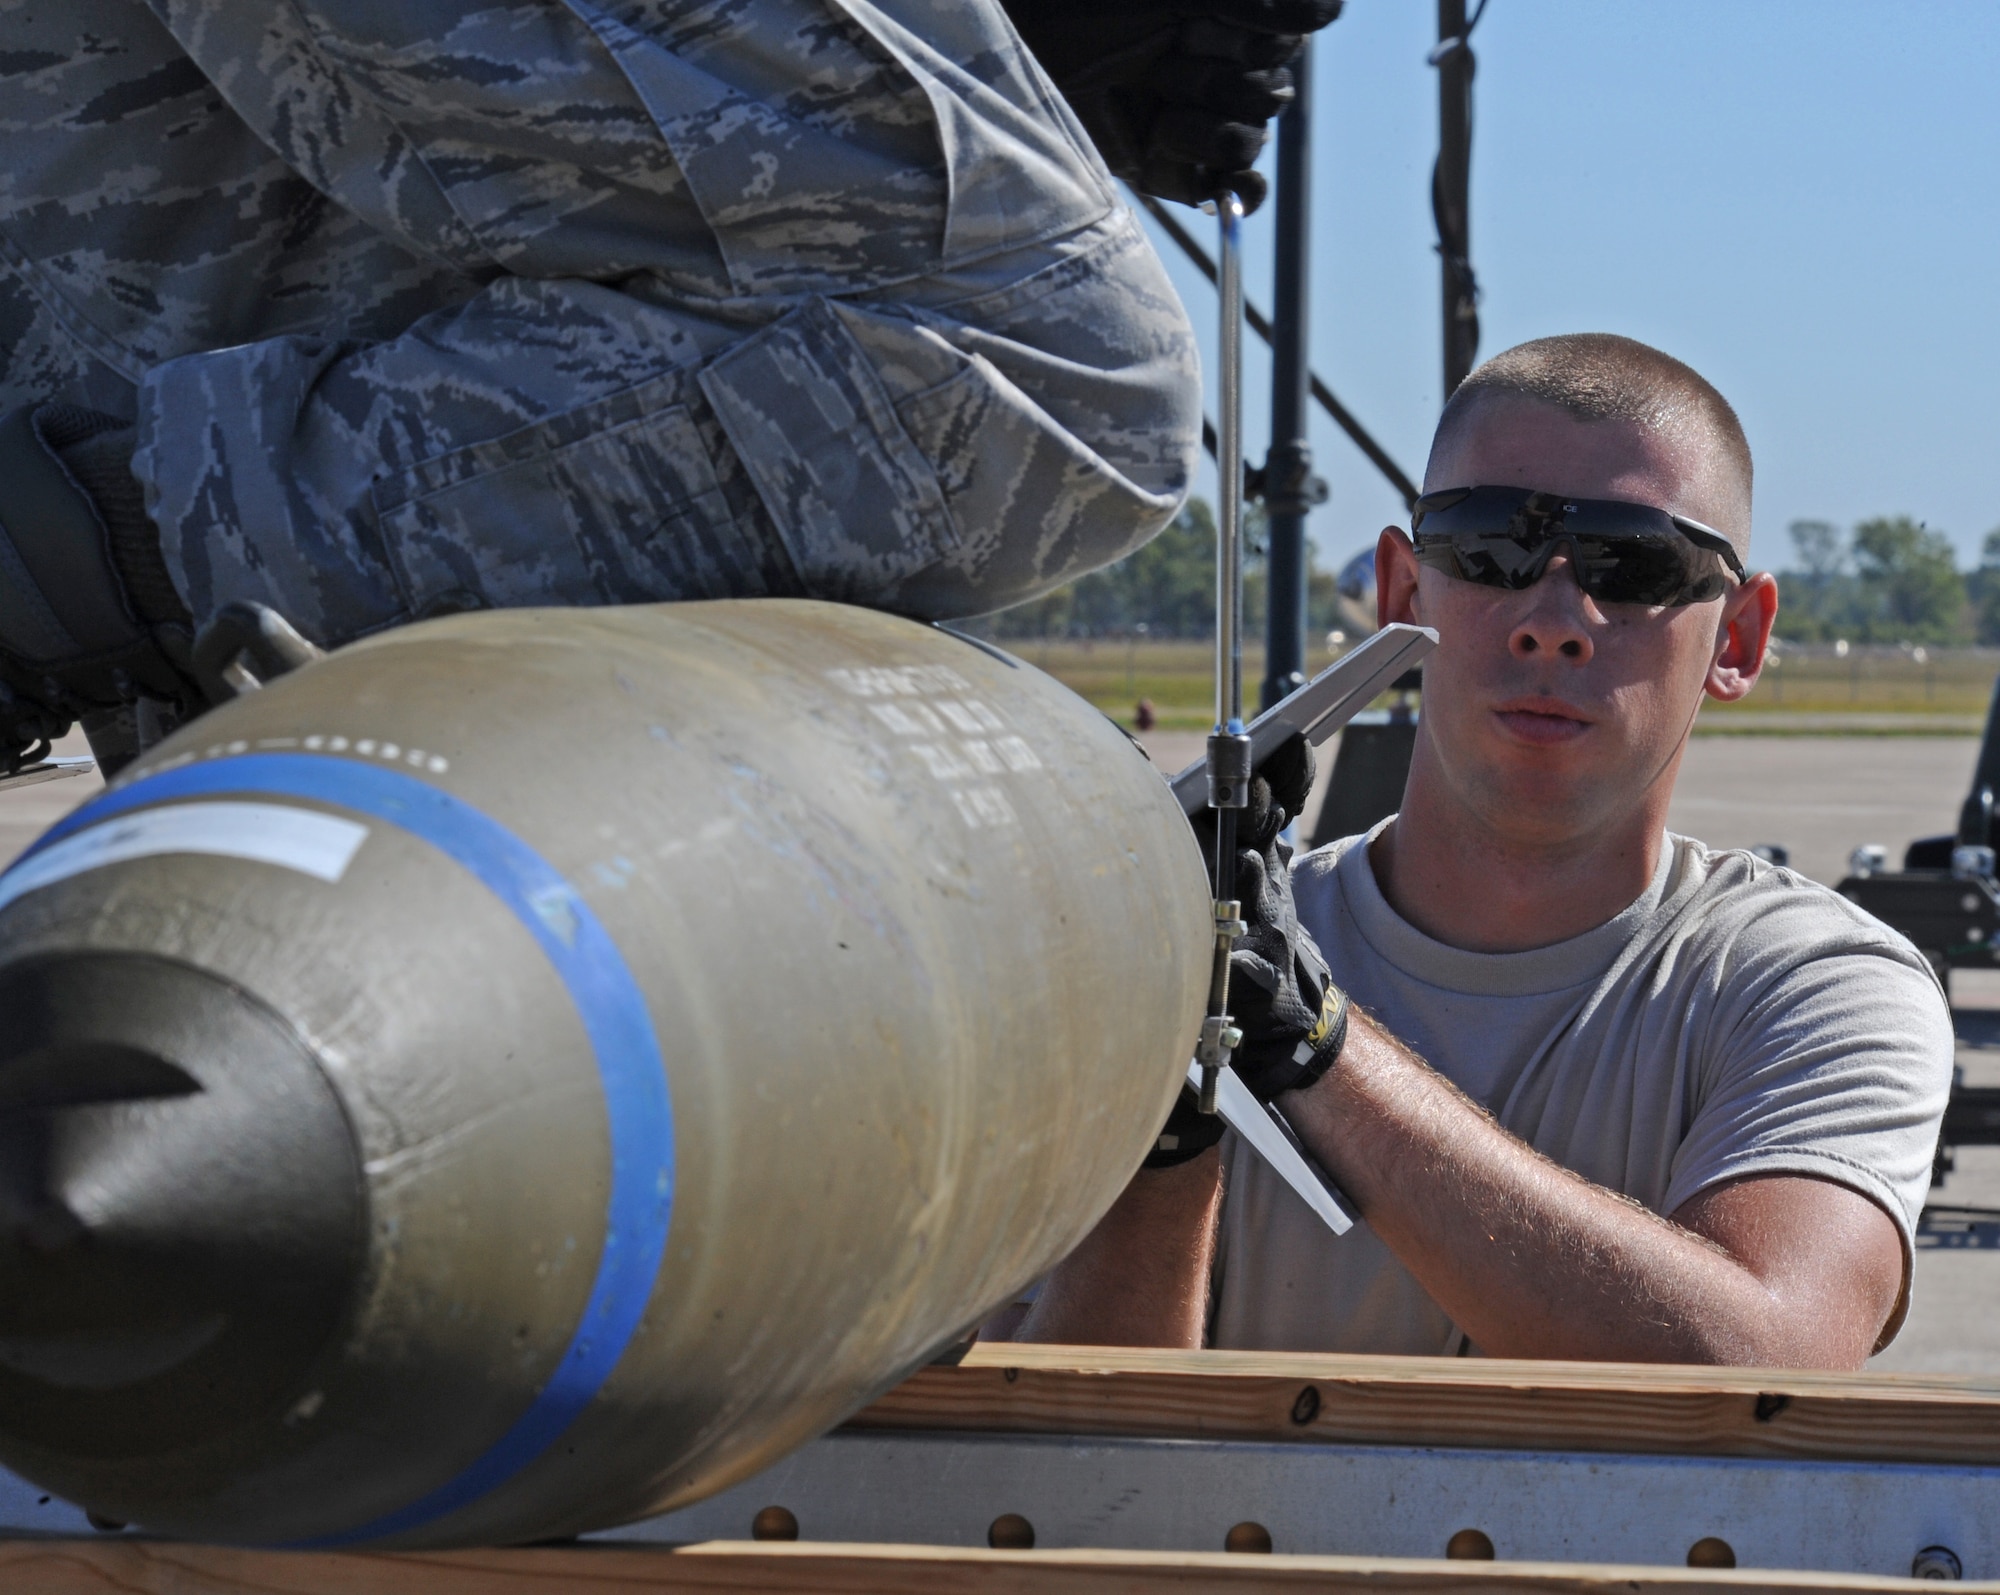 Airmen from the 2nd Munitions Squadron attach the tail section of a 500-pound bomb during the Global Strike Challenge Munitions Maintenance Competition on Barksdale Air Force Base, La., Oct. 3. The goal of the competition is to increase morale, teamwork and readiness. (U.S. Air Force photo/Airman 1st Class Micaiah Anthony)(RELEASED)